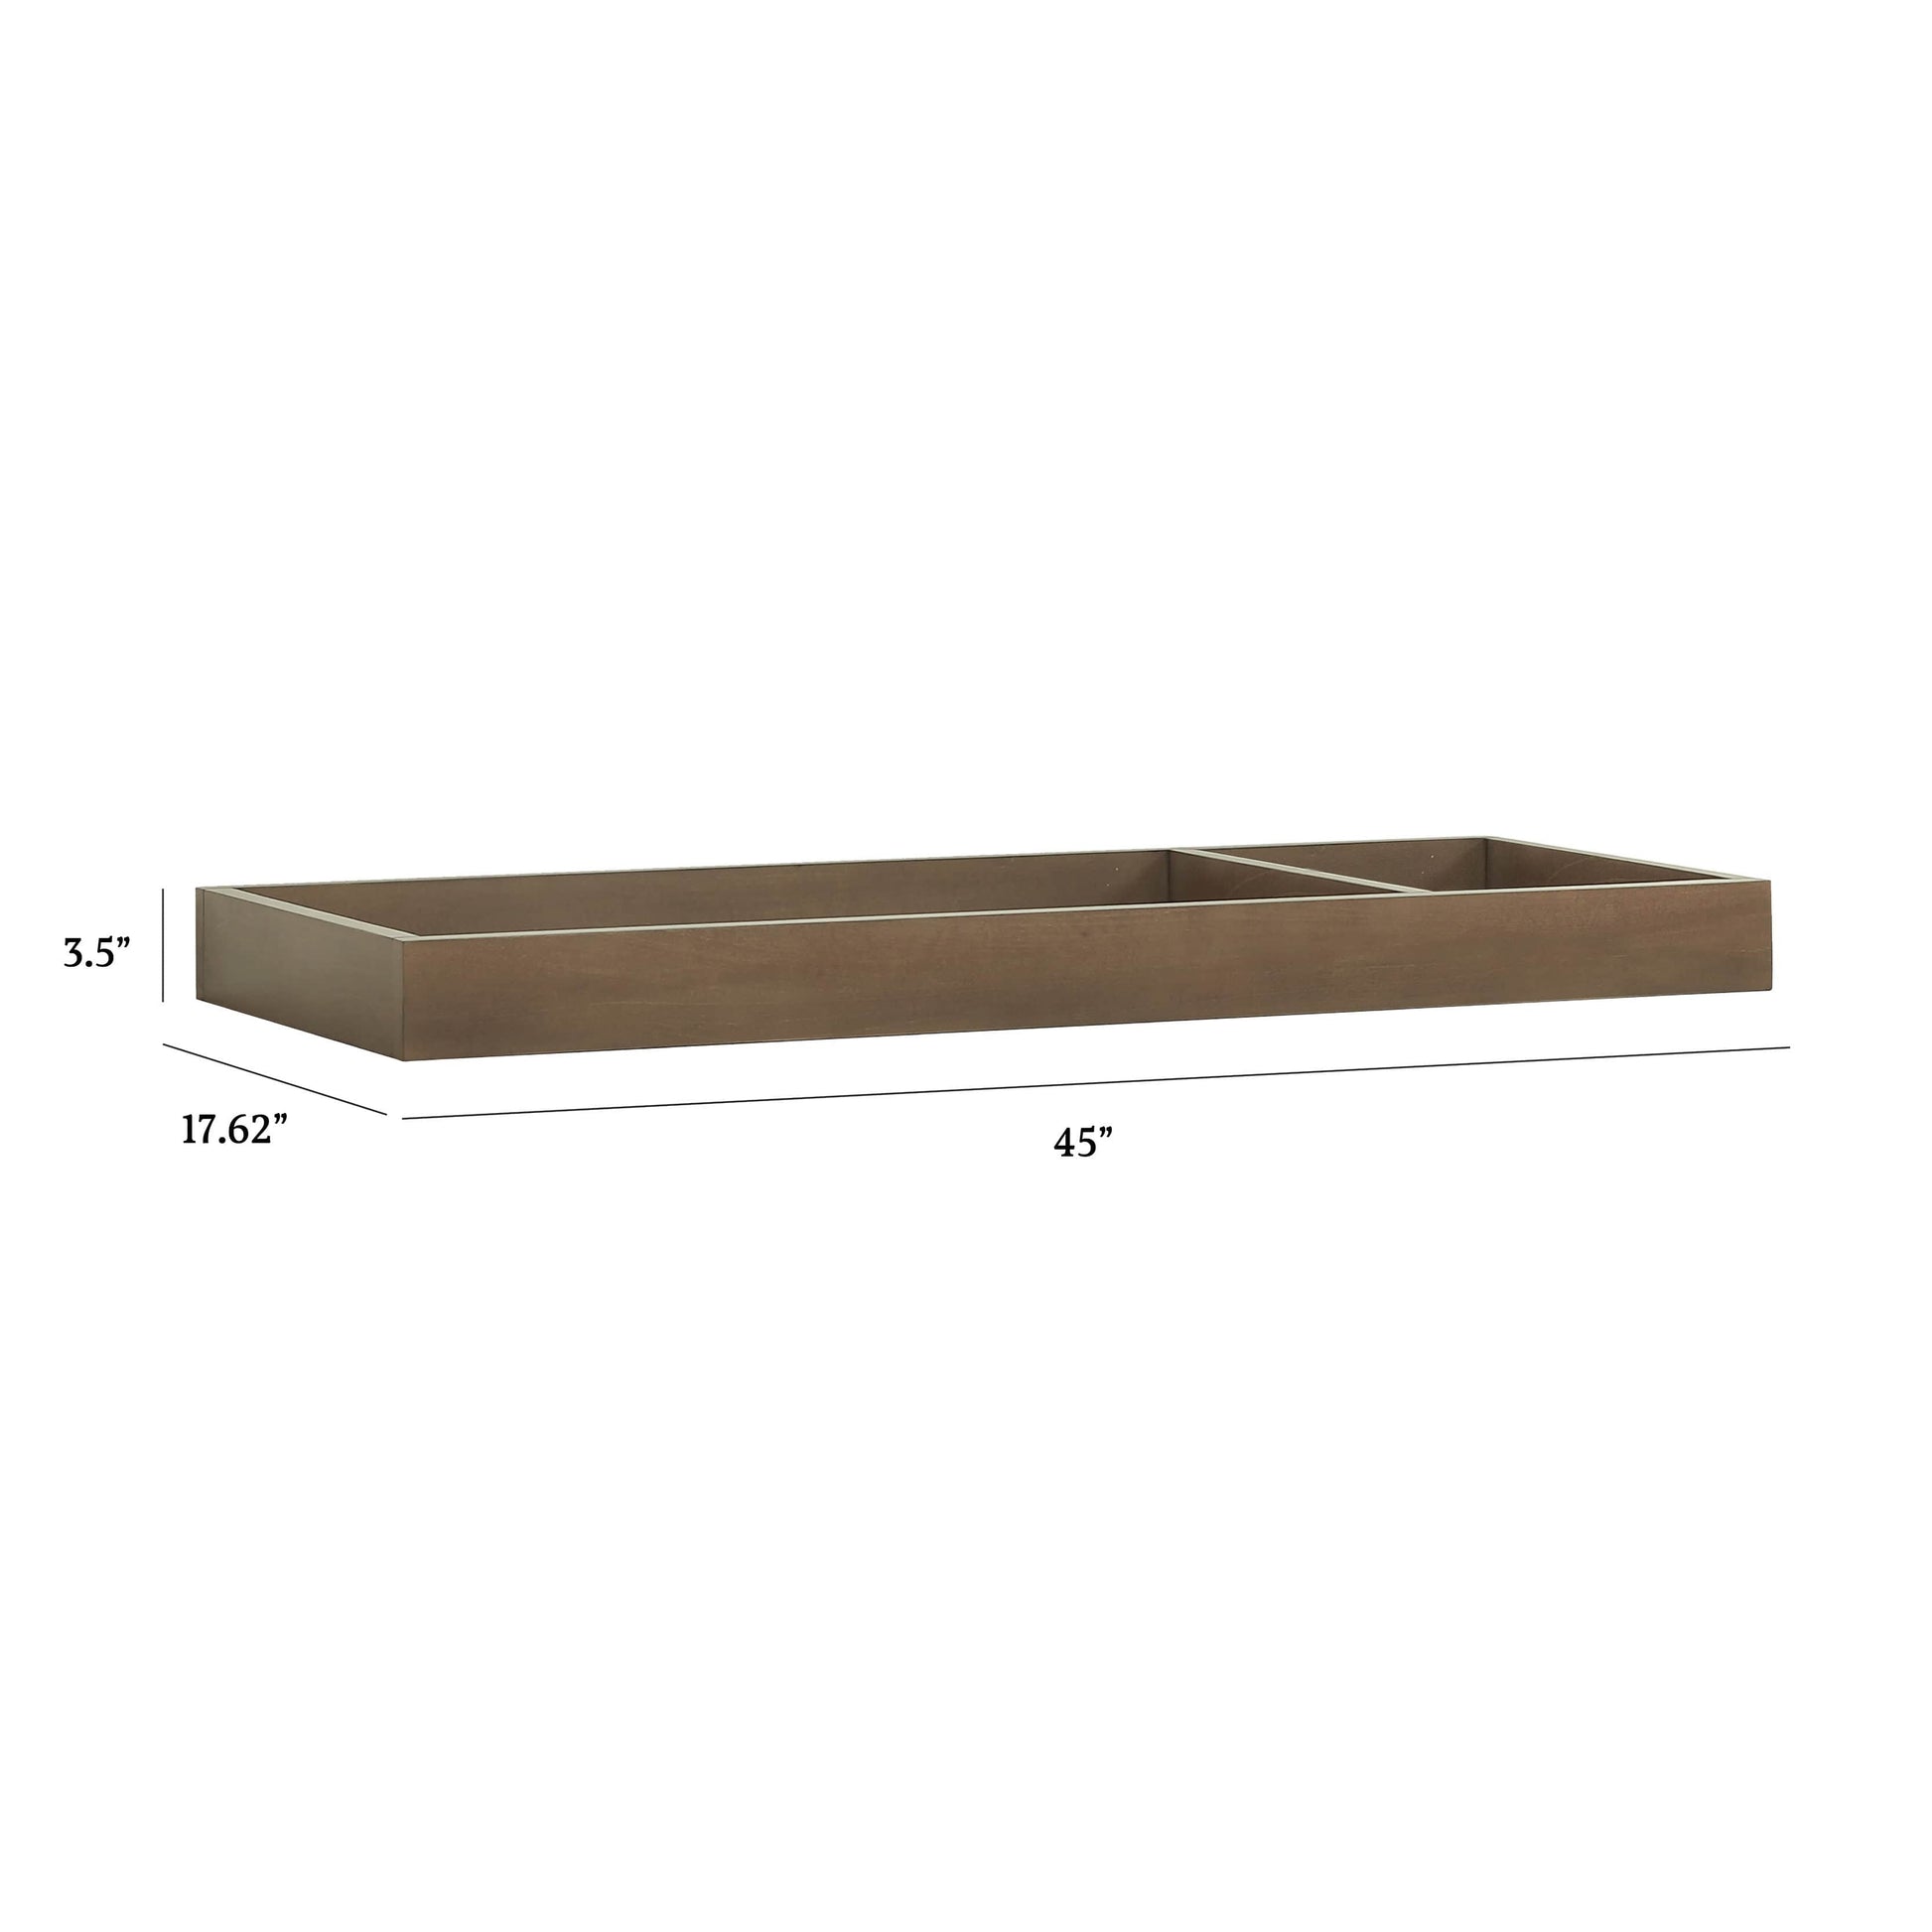 M0619DB,Universal Wide Removable Changing Tray in Derby Brown